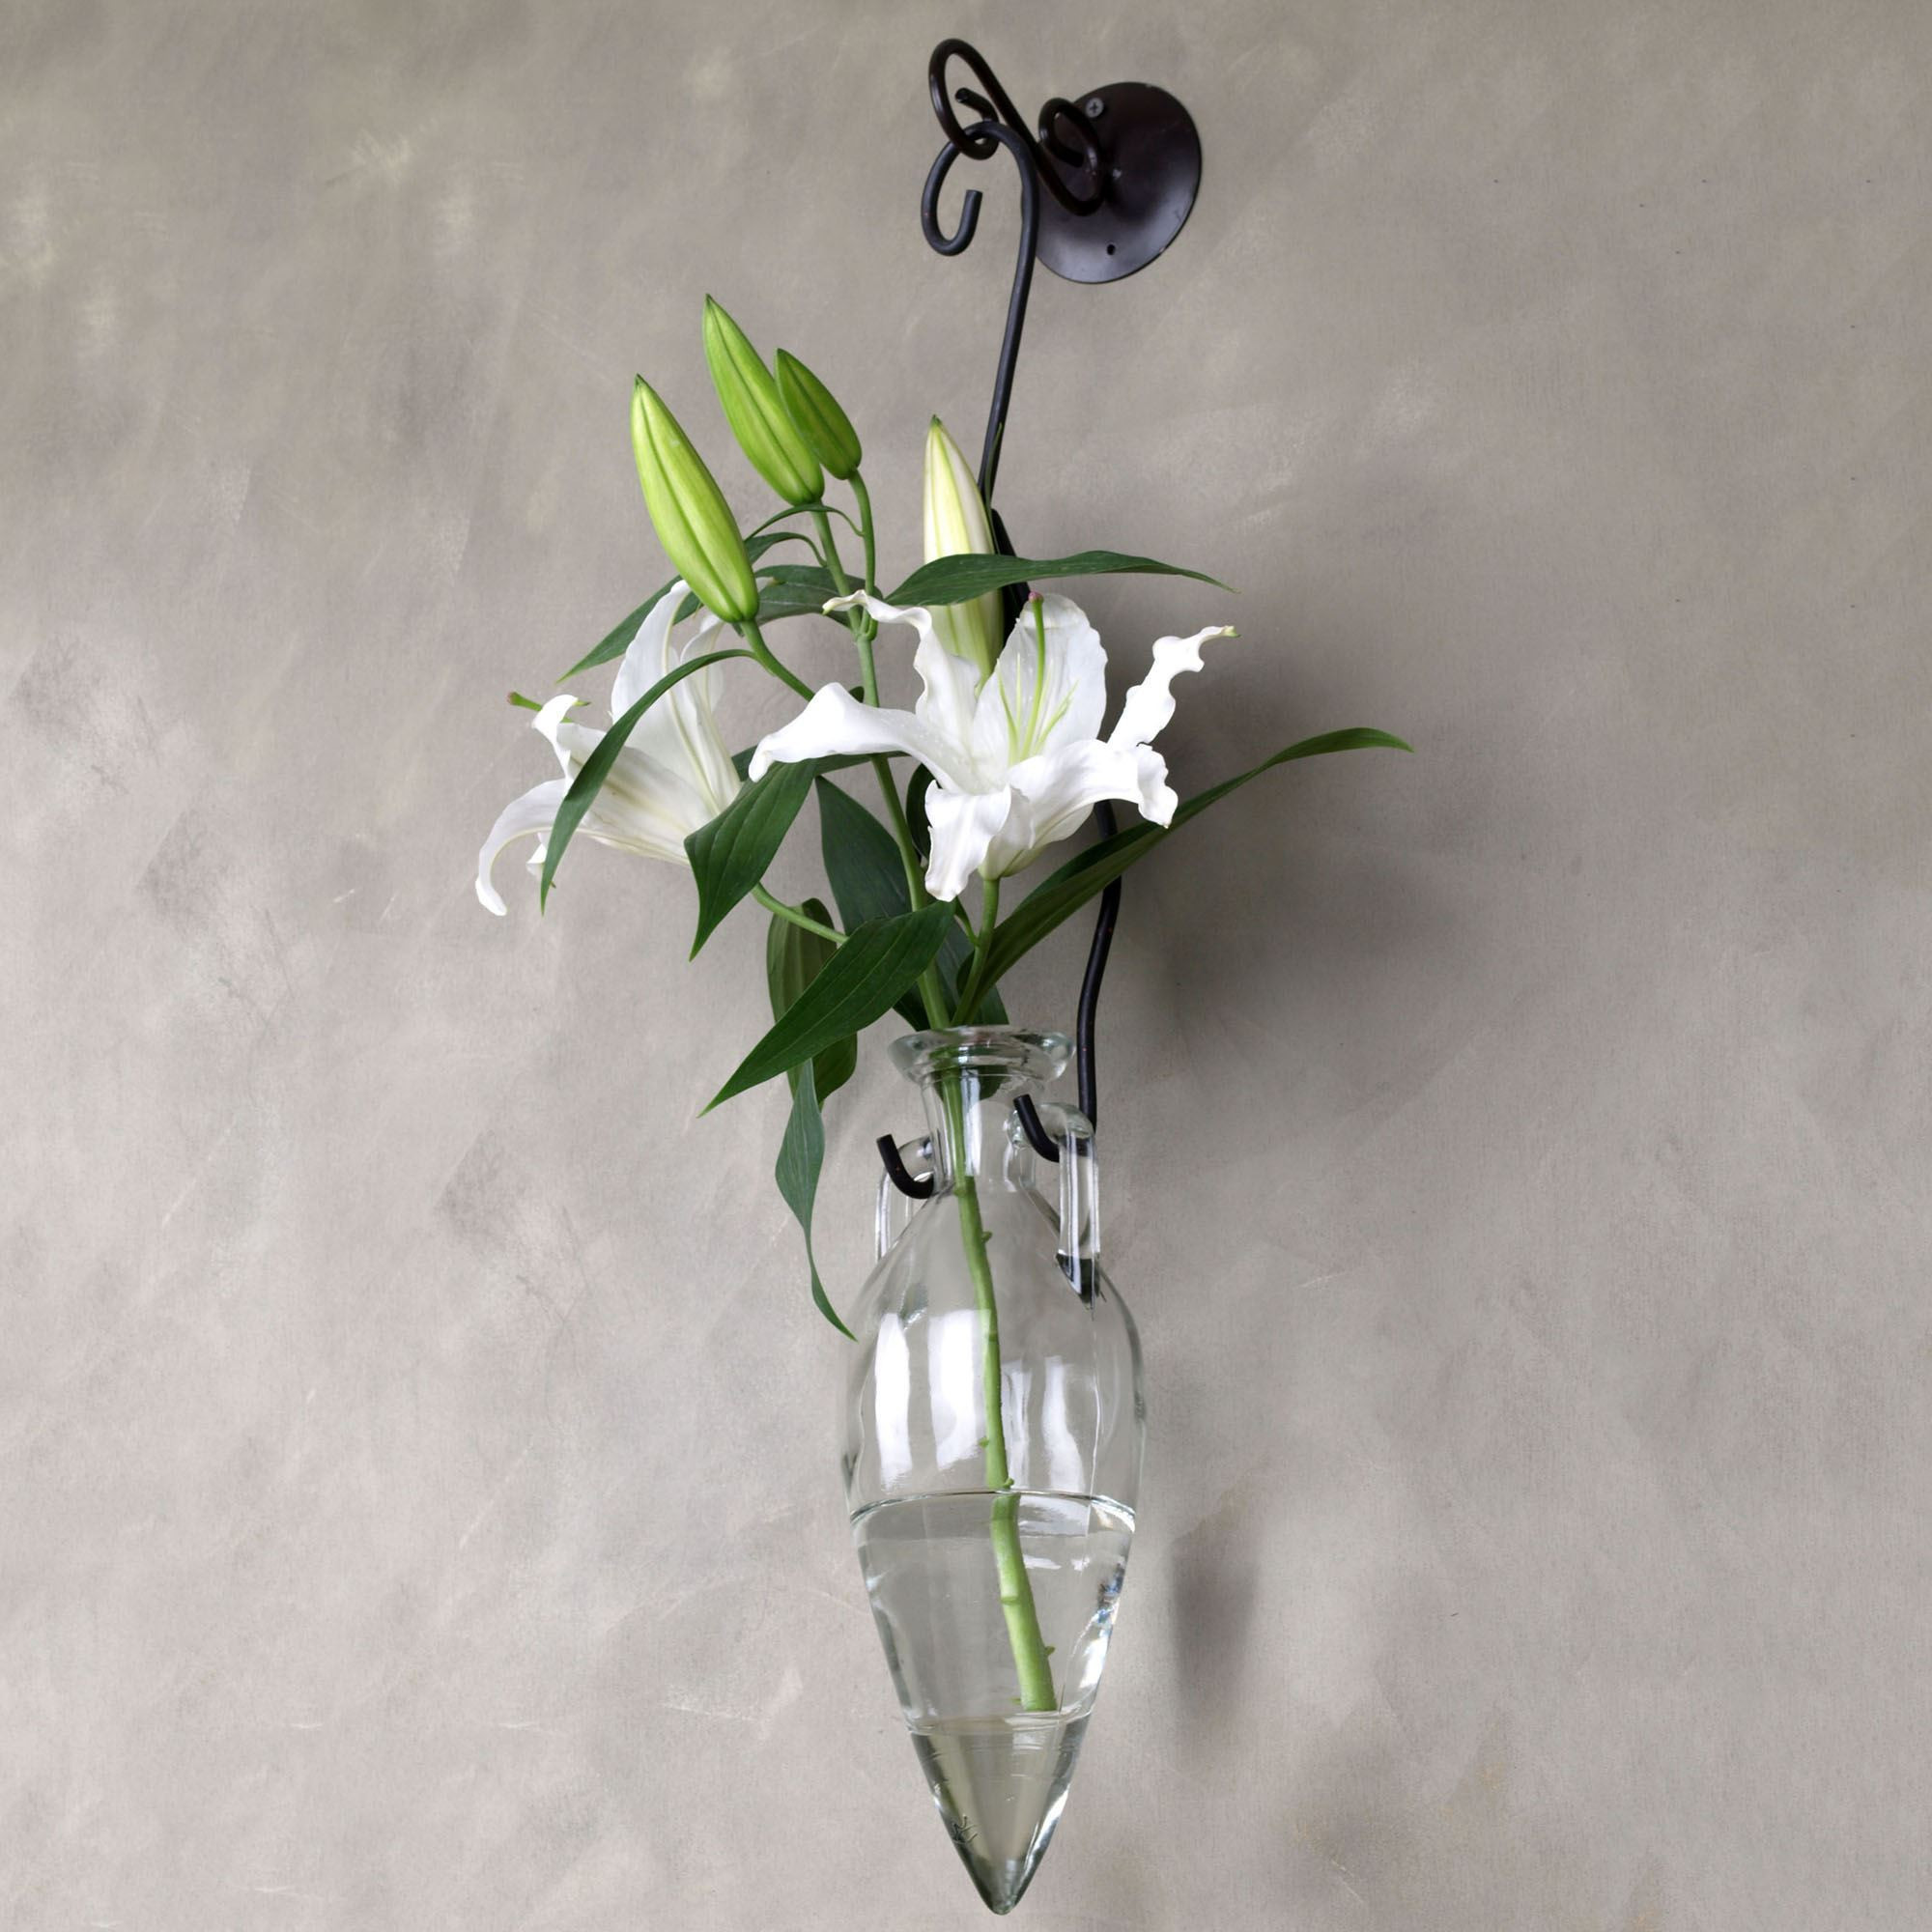 16 attractive Glass Flowers and Vase 2024 free download glass flowers and vase of wall decor flowers great h vases wall hanging flower vase newspaper for wall decor flowers great h vases wall hanging flower vase newspaper i 0d scheme wall scheme